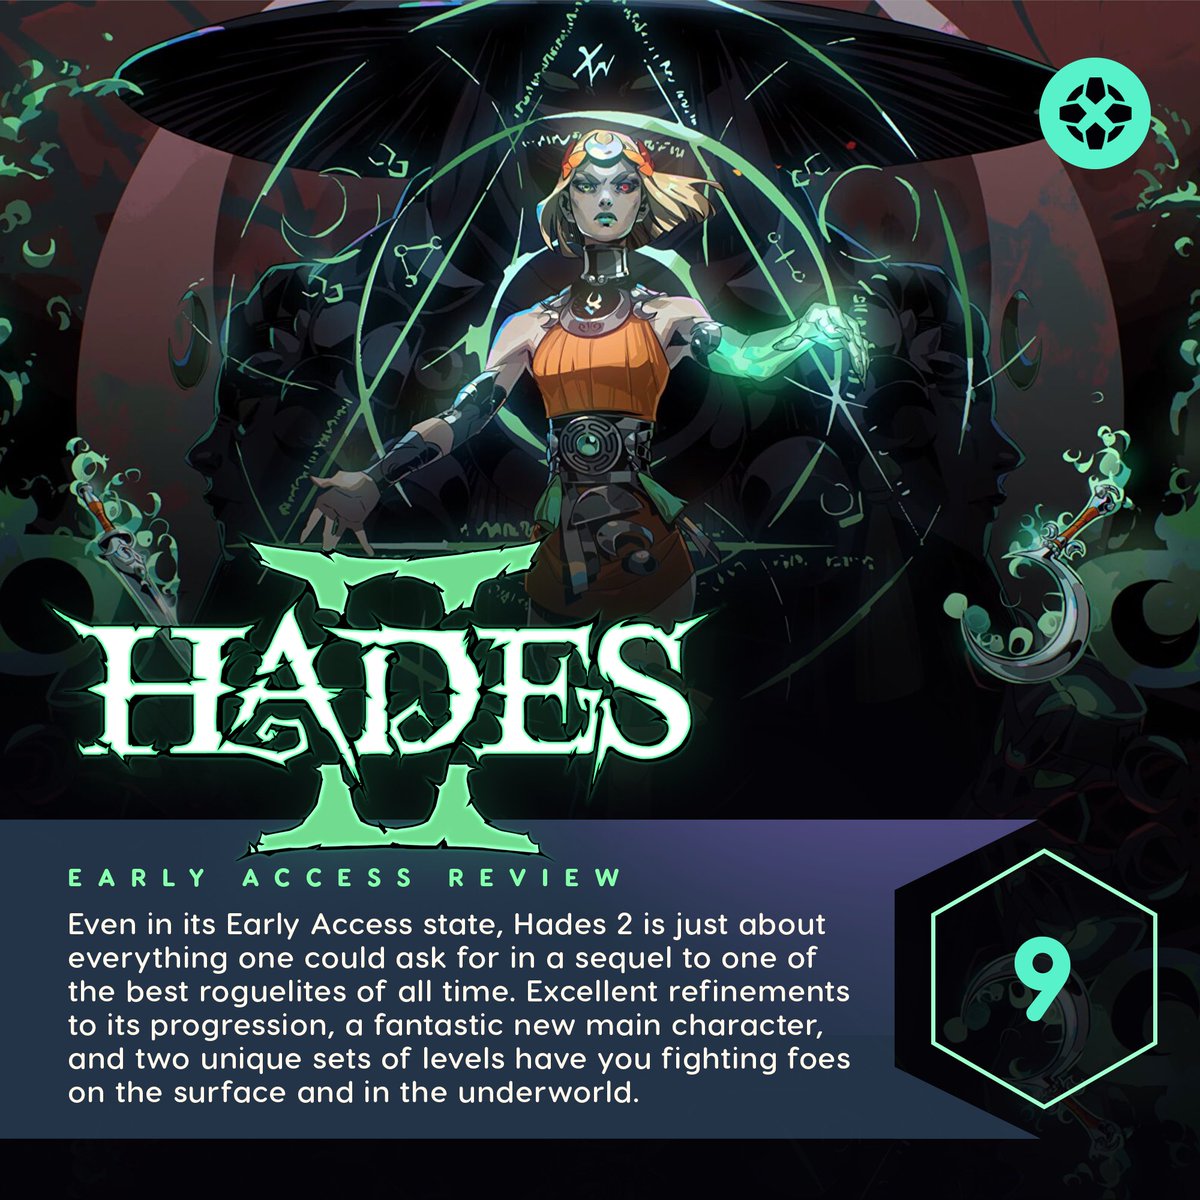 Hades 2 feels impossibly huge and unbelievably polished by any standard, much less an early access game. Mel is awesome, the new tweaks to the combat and progression are excellent, and its just unbelievably feature packed. bit.ly/4a6Ozha